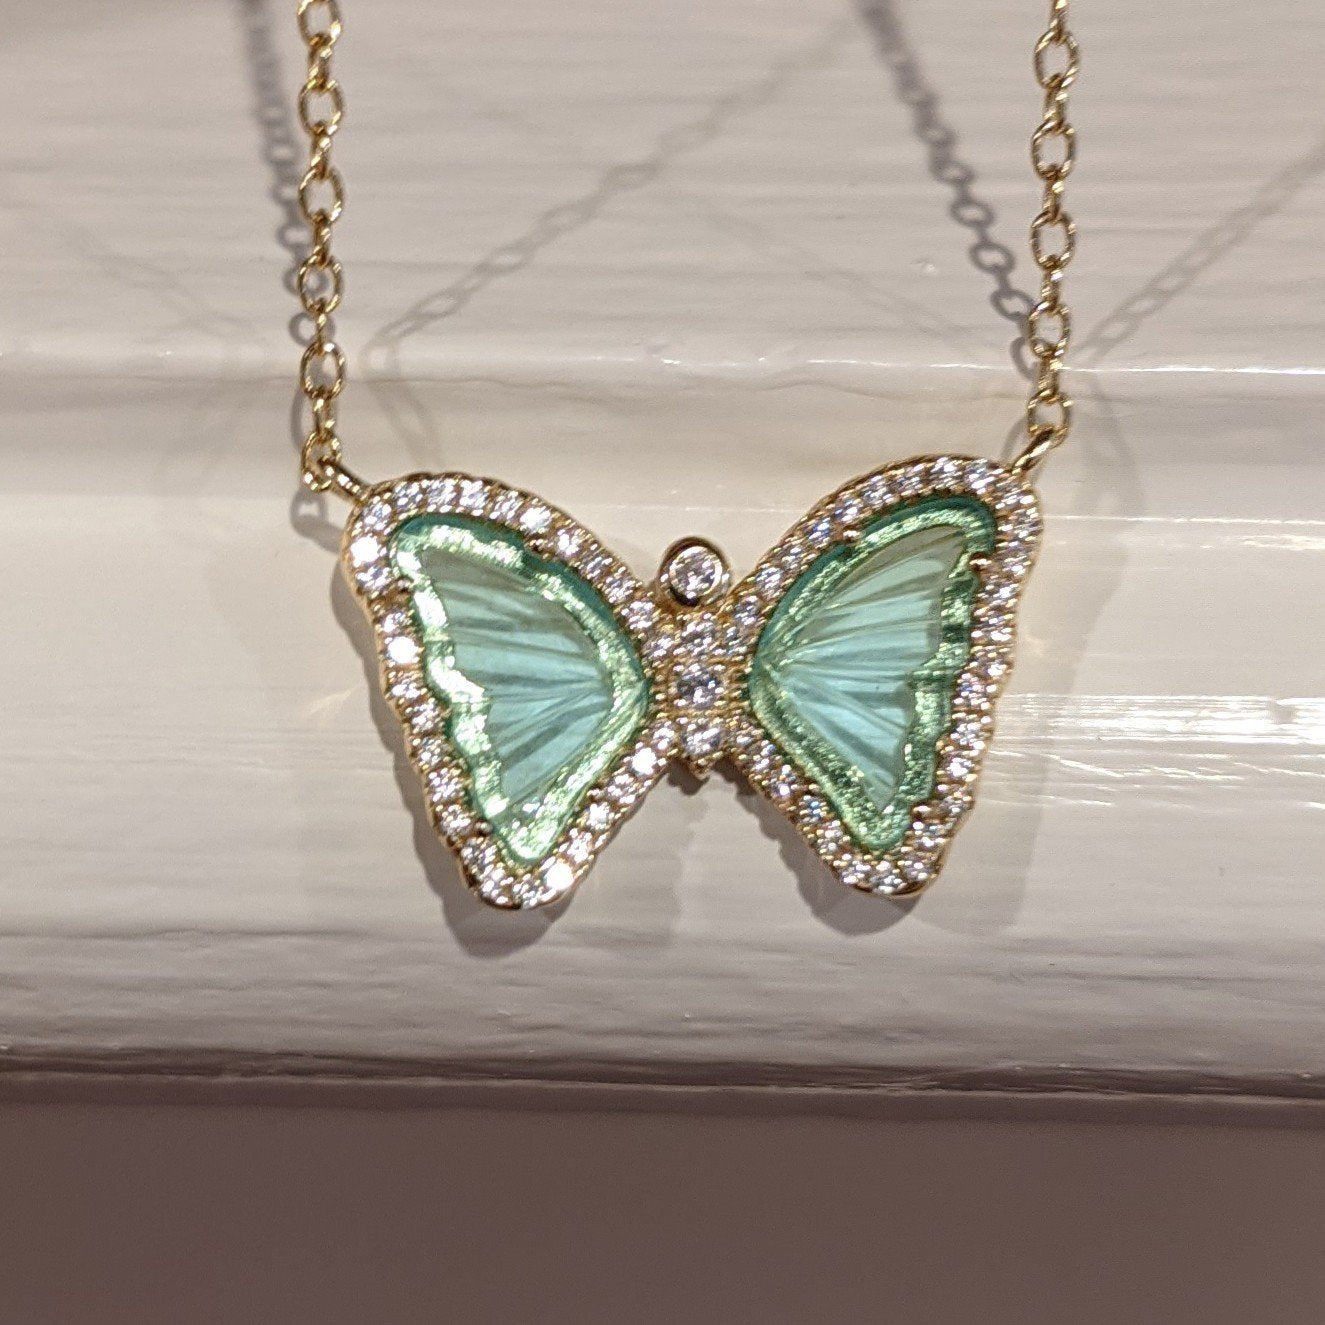 Mini gemstone butterfly necklace in aqua green and yellow gold